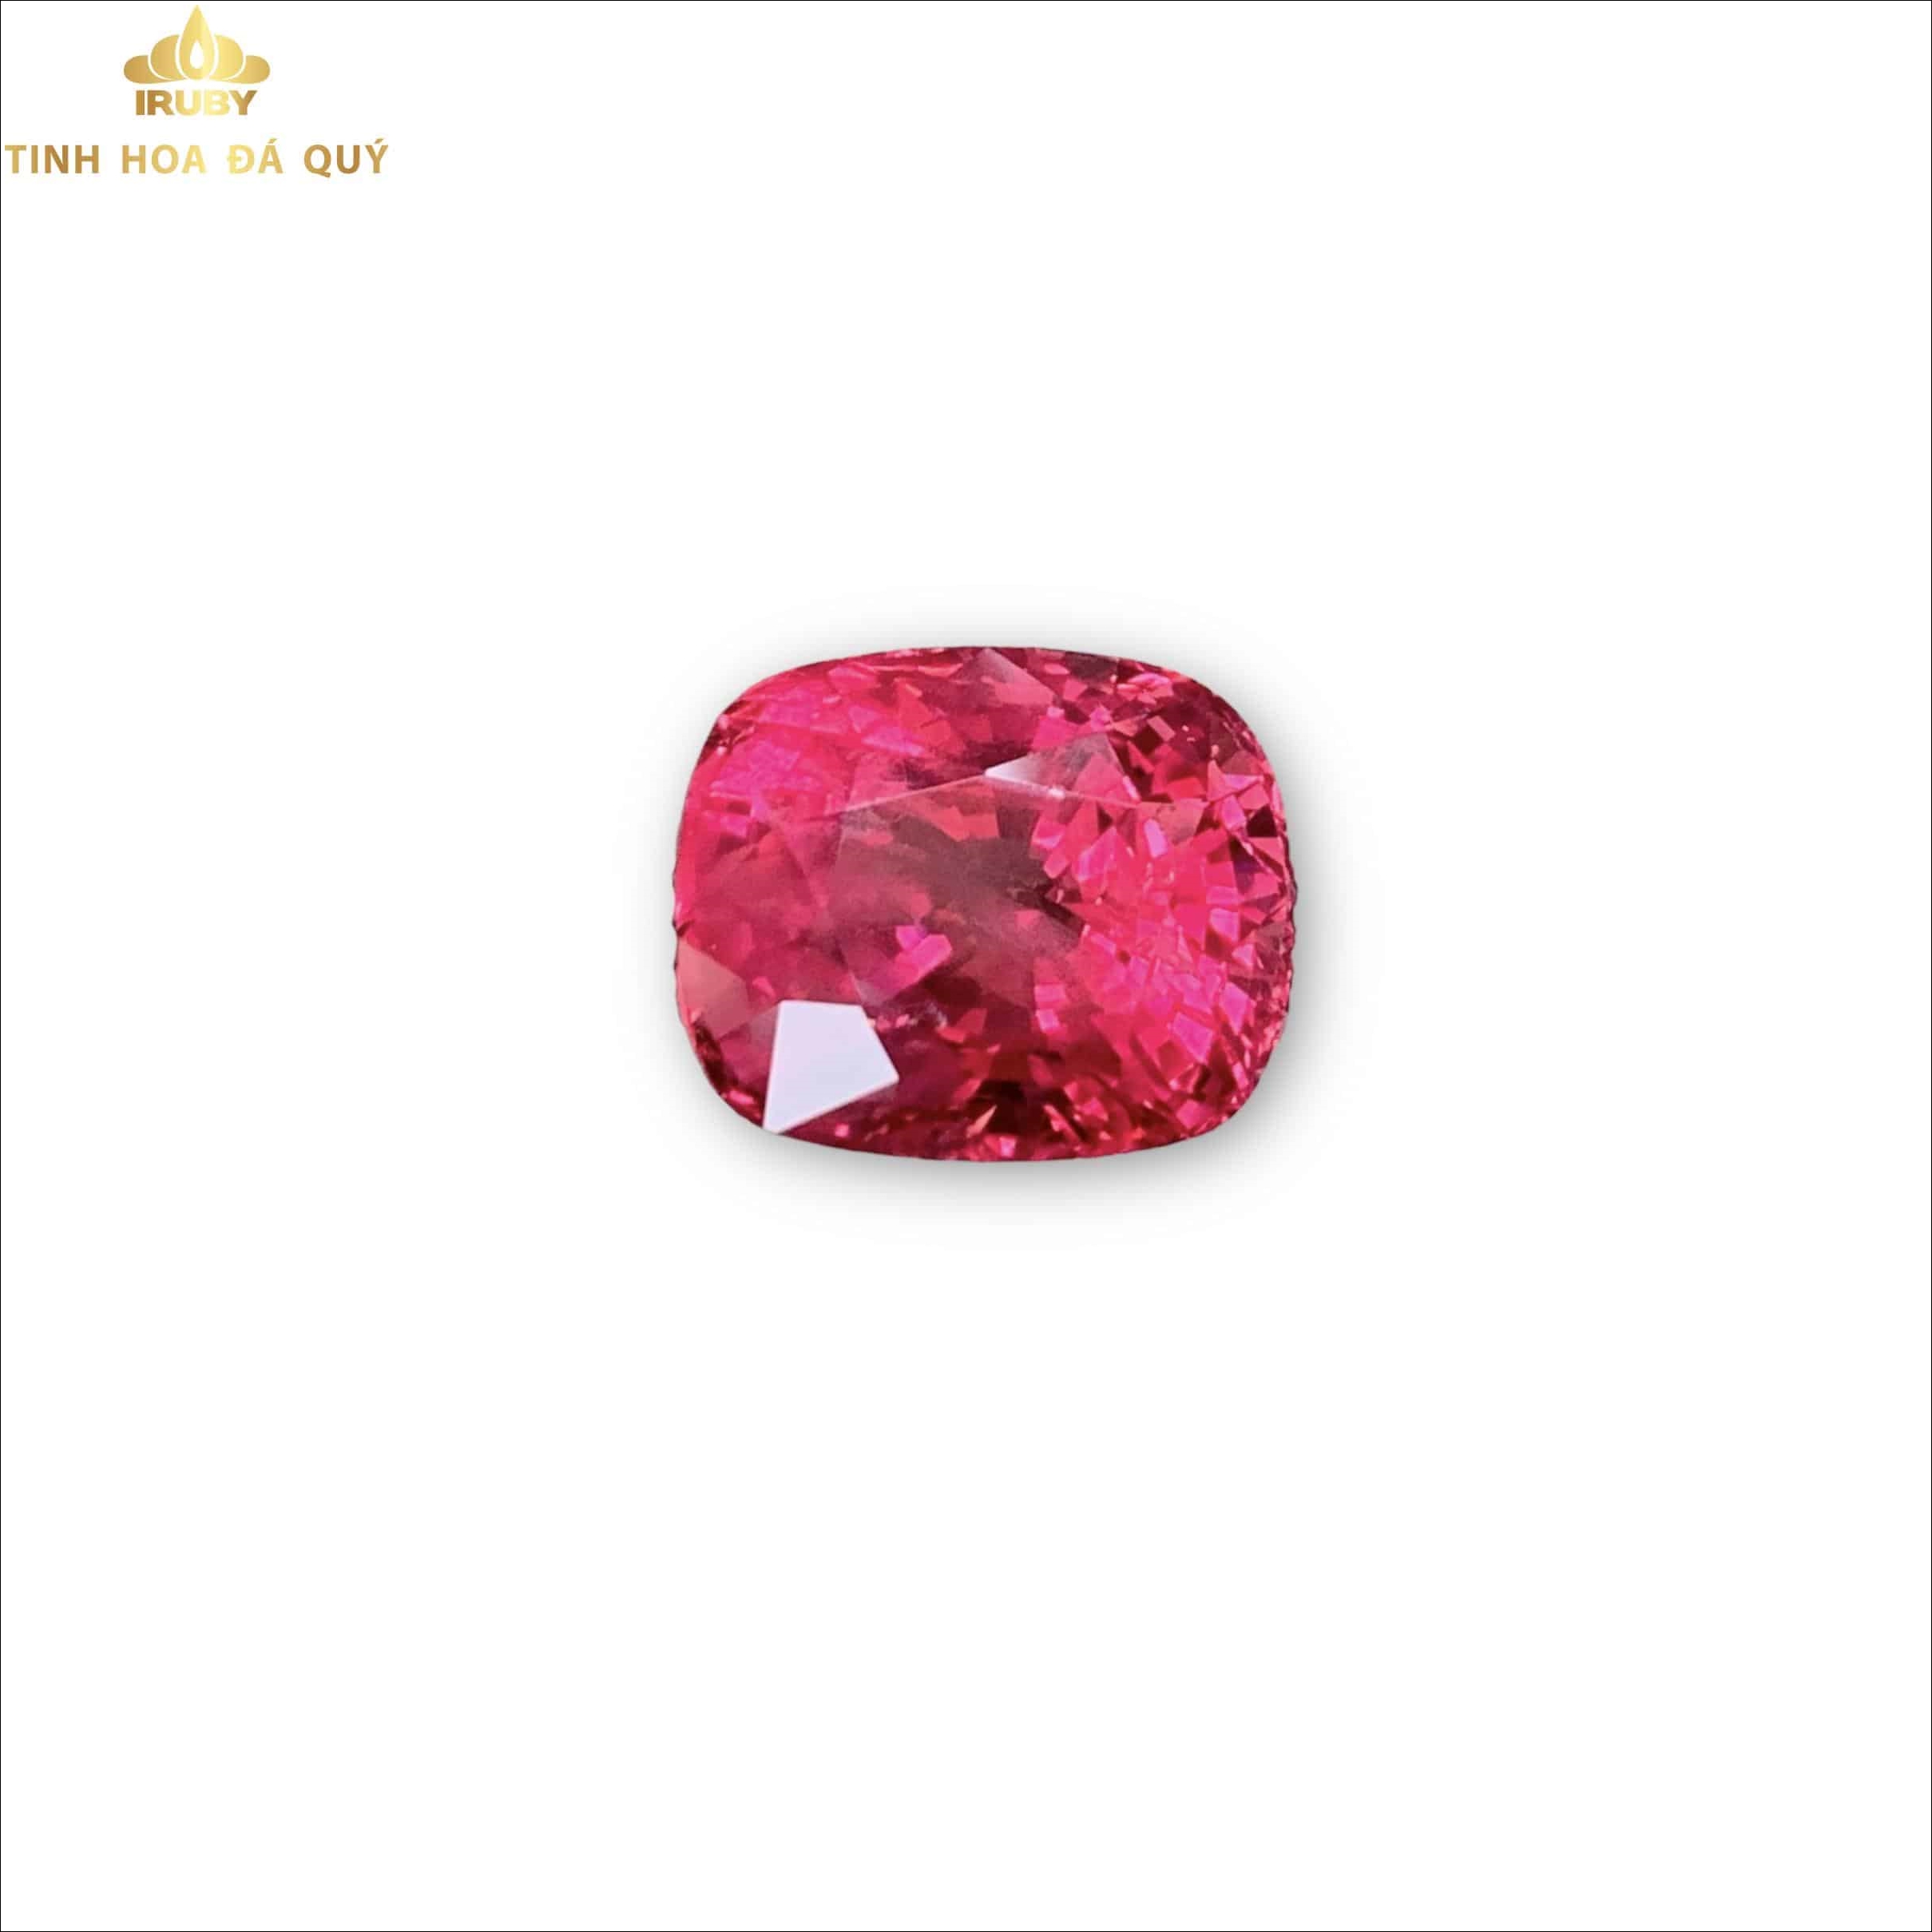 Spinel đỏ hồng màu TOP Spinel 10,66ct - IRSI2302106